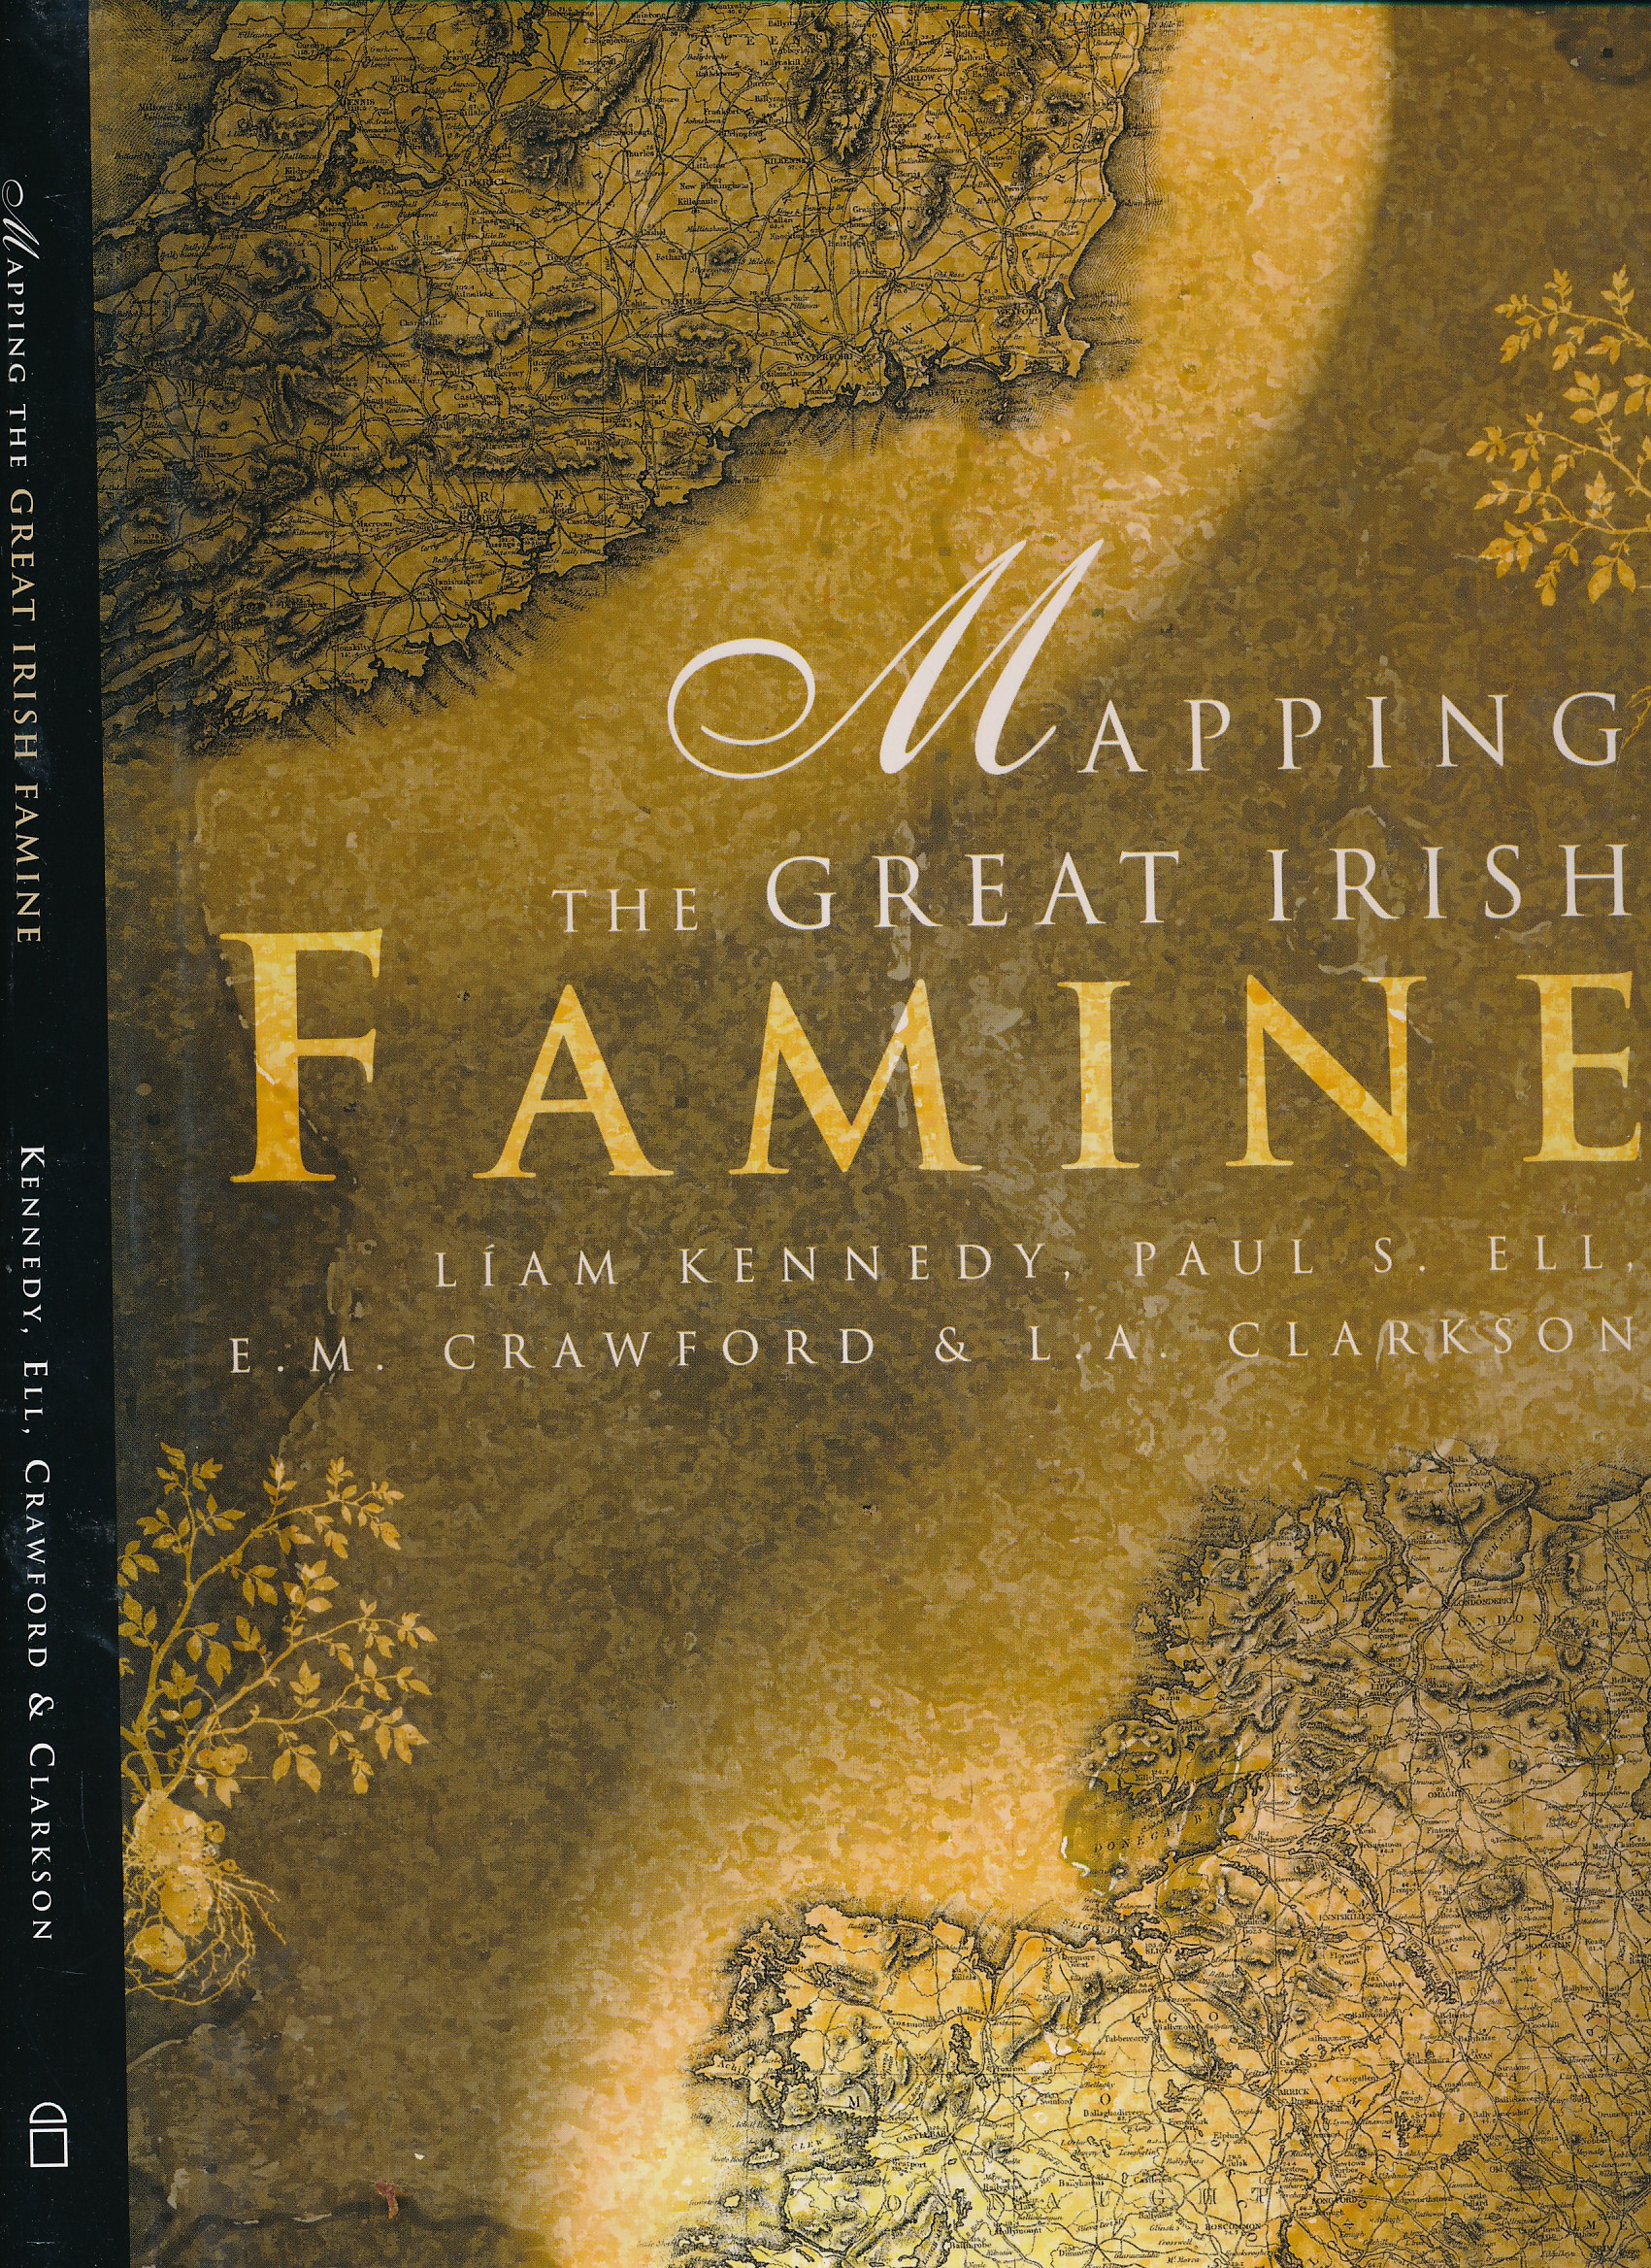 Mapping the Great Irish Famine. A Survey of the Famine Decades